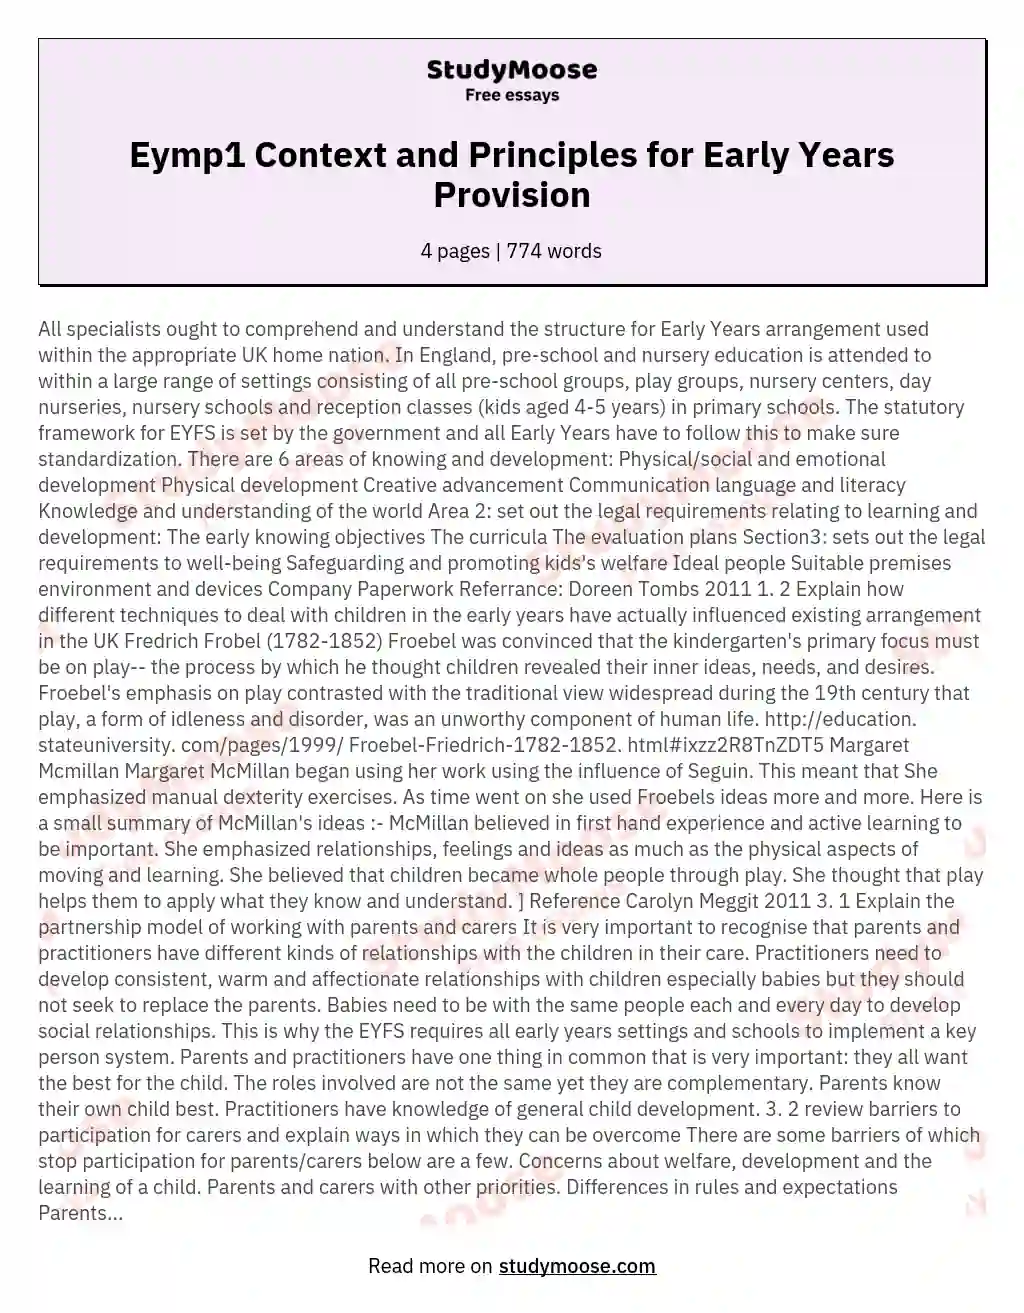 Eymp1 Context and Principles for Early Years Provision essay